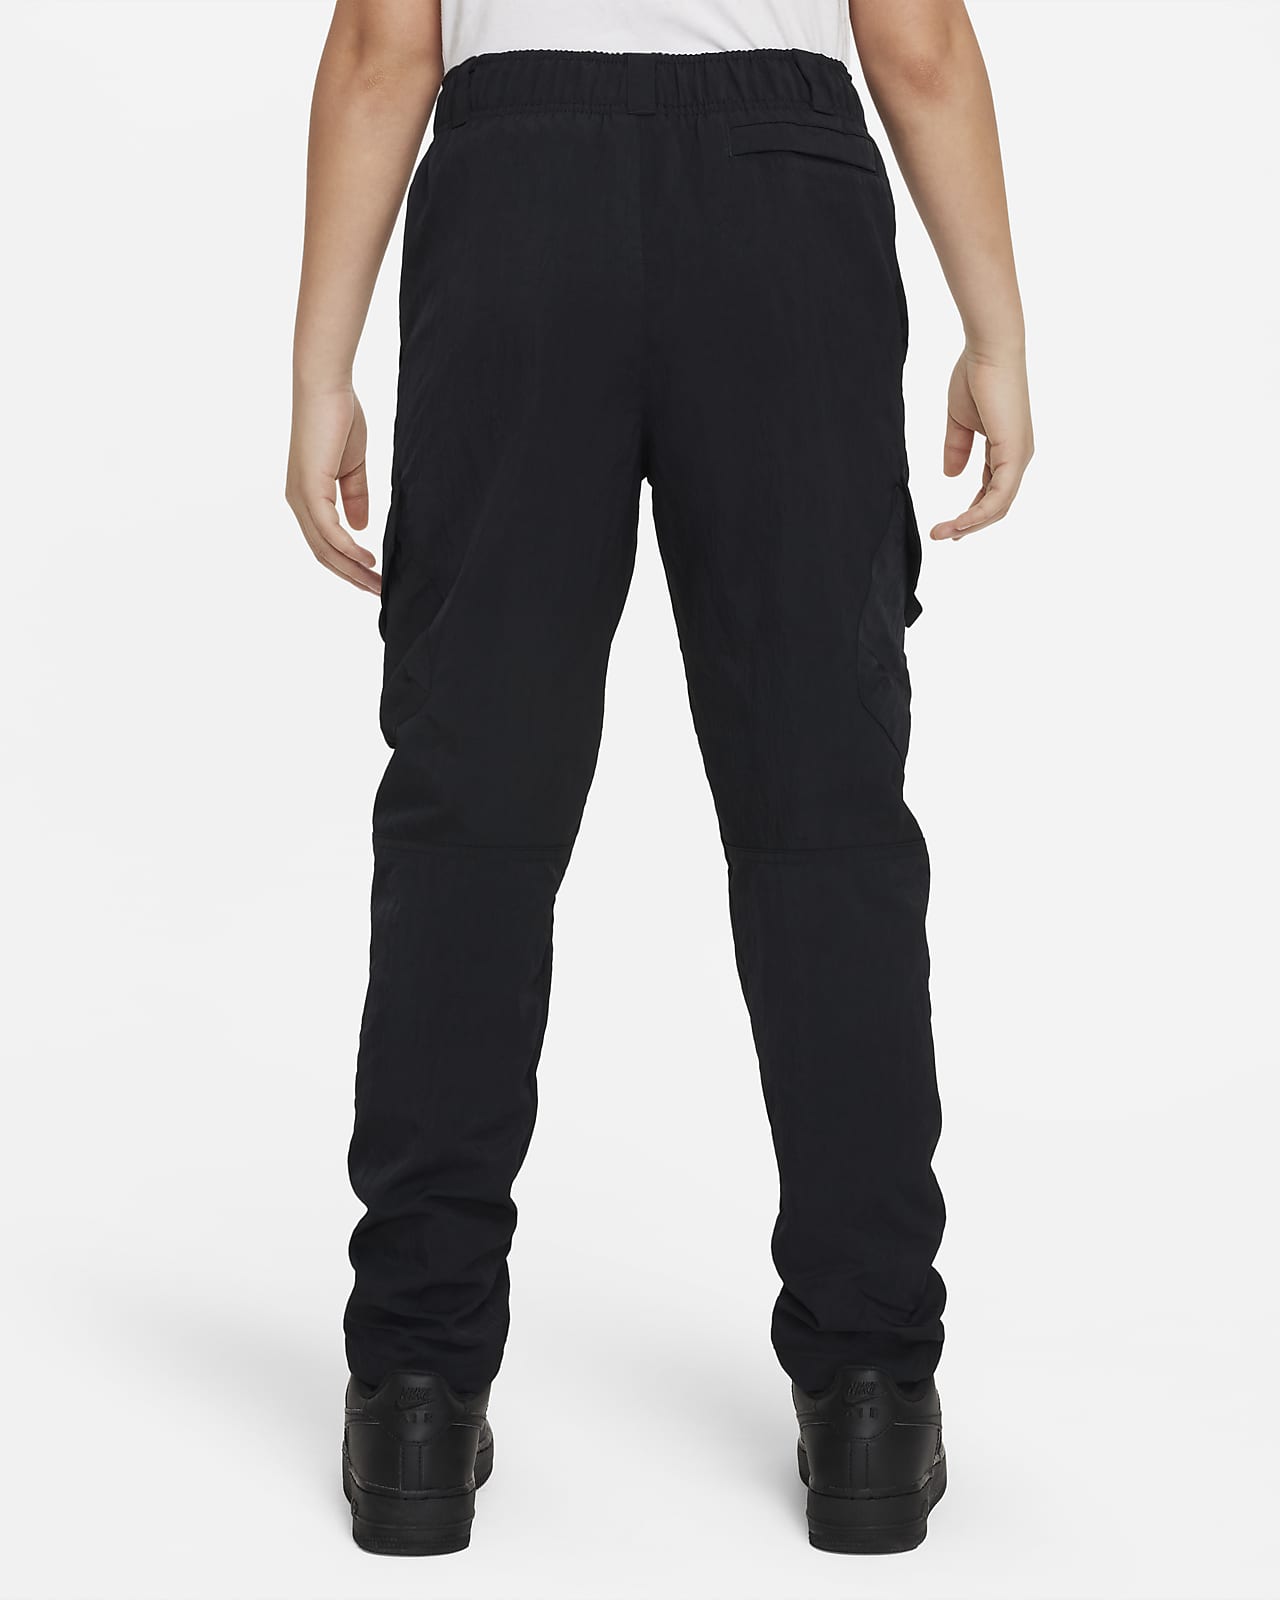 Shop White Stuff Women's Cargo Trousers up to 70% Off | DealDoodle